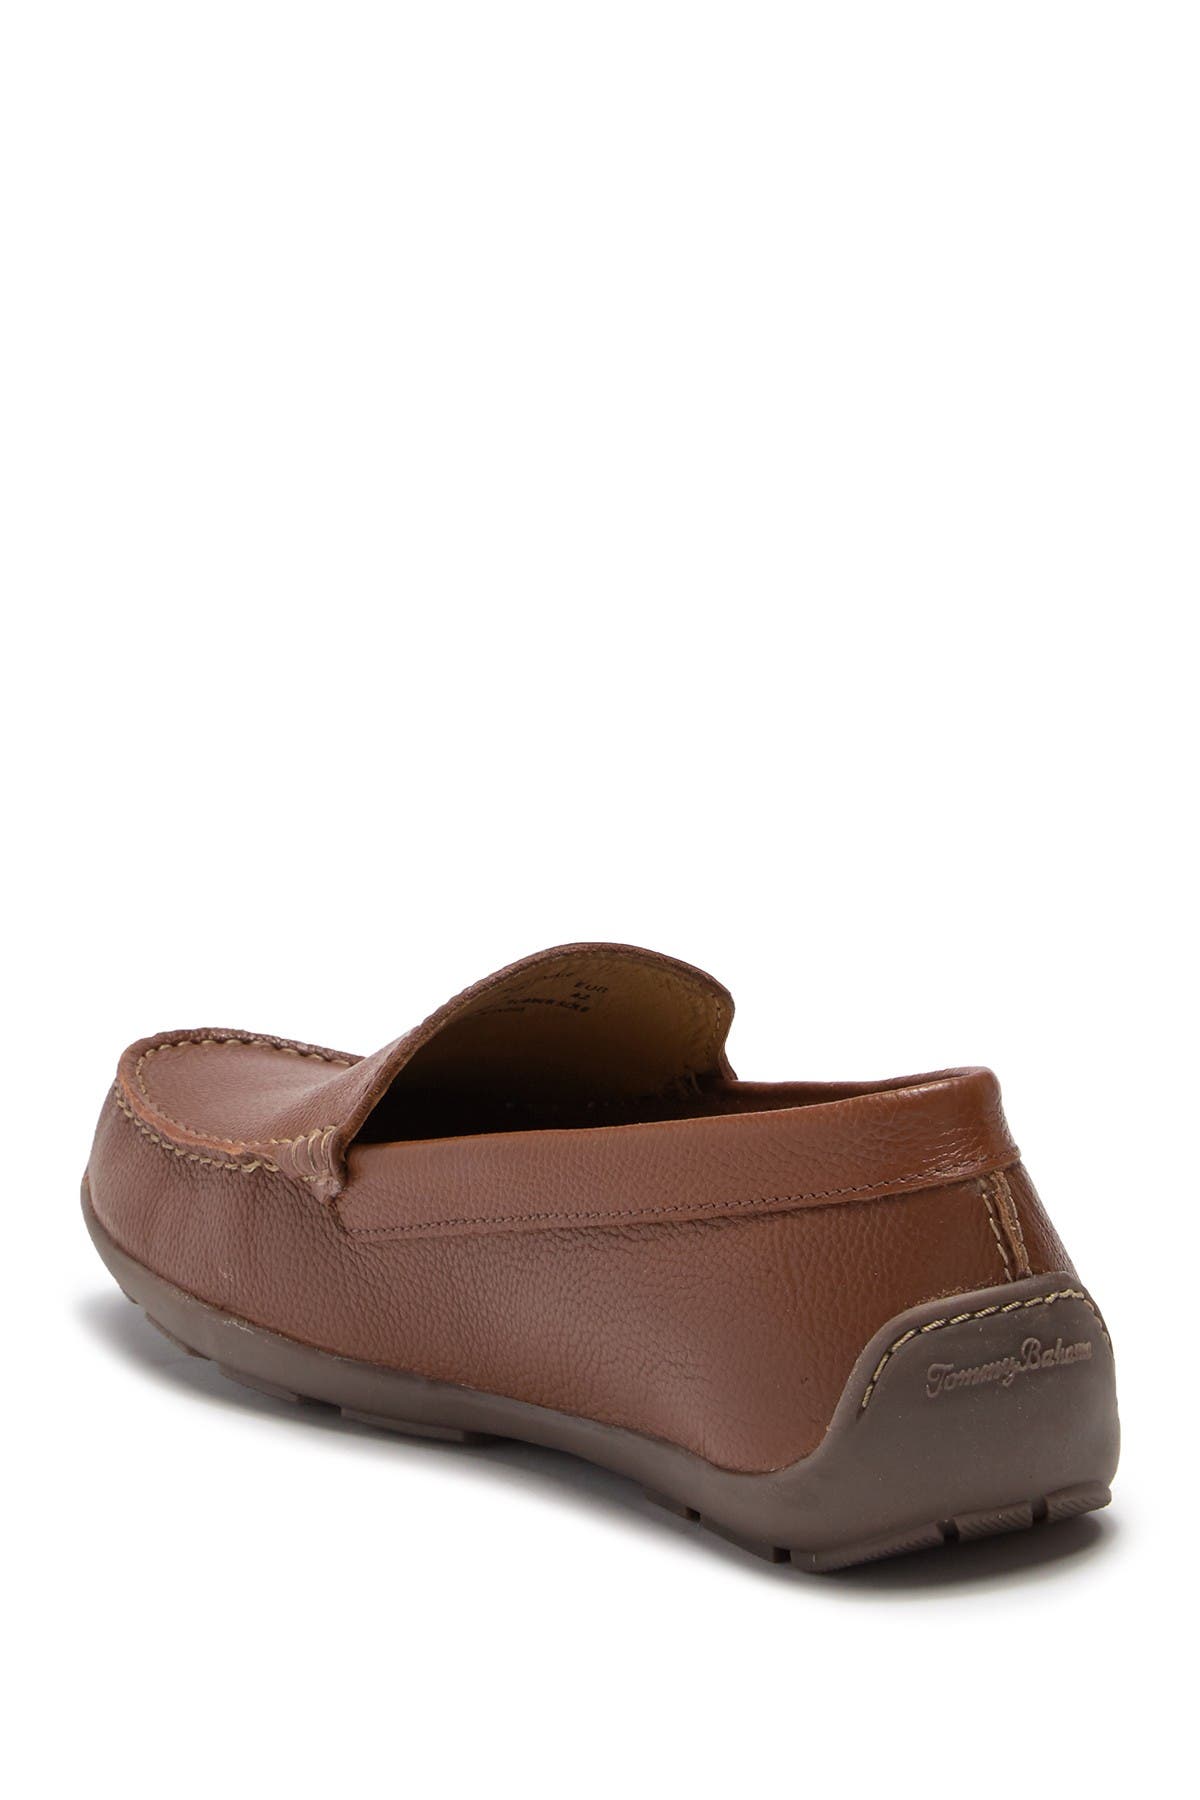 Tommy Bahama | Acanto Leather Loafer 